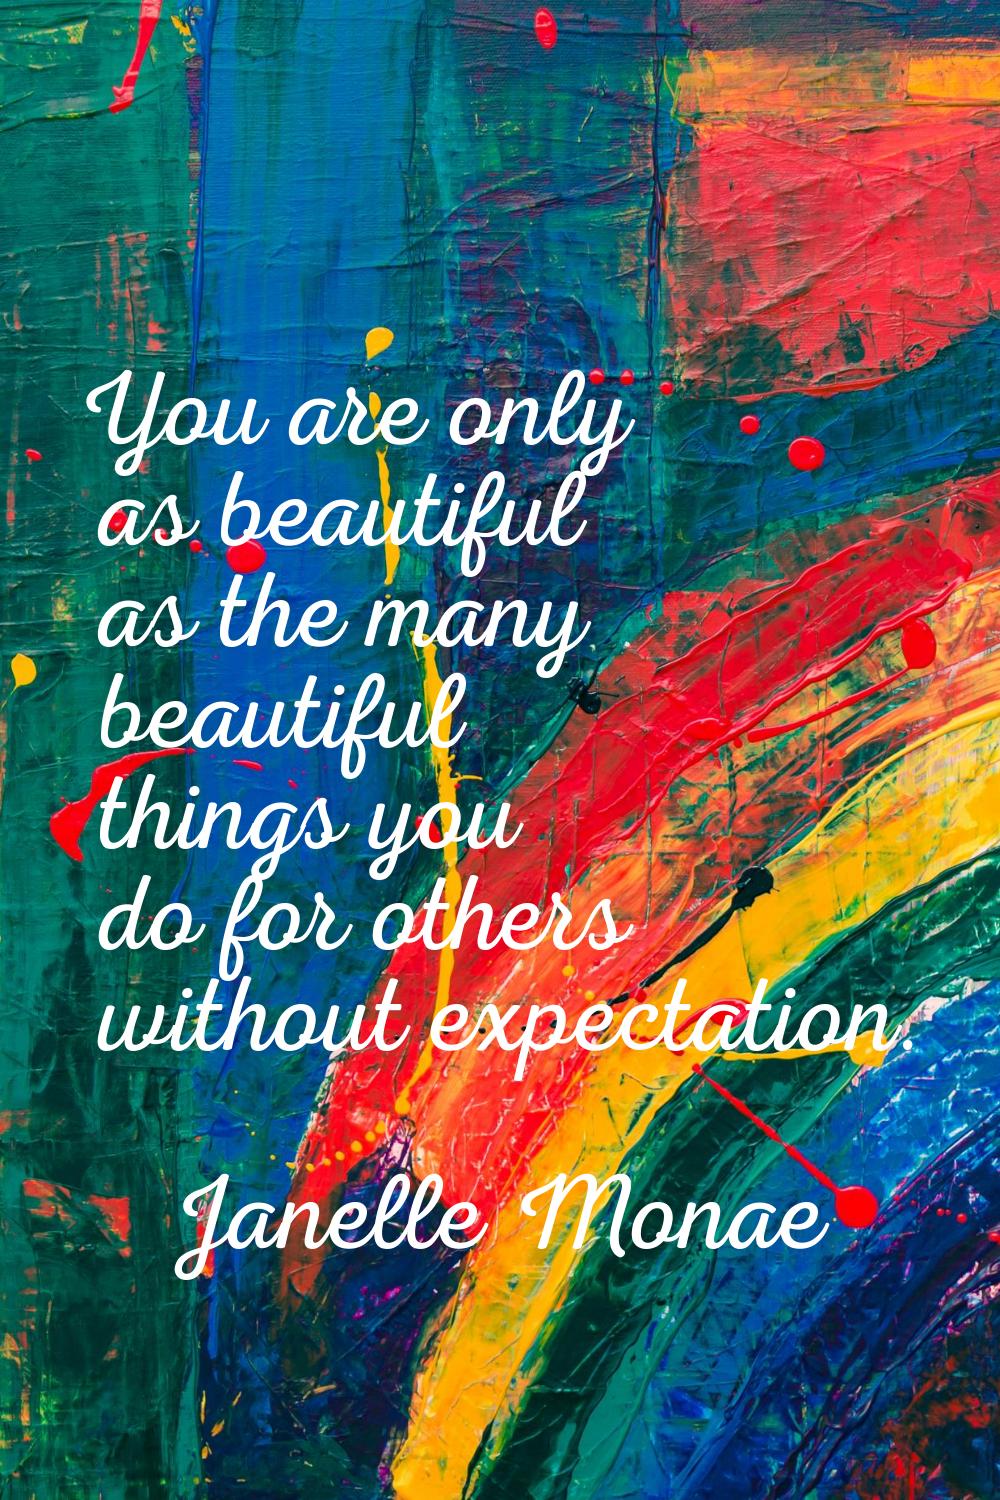 You are only as beautiful as the many beautiful things you do for others without expectation.